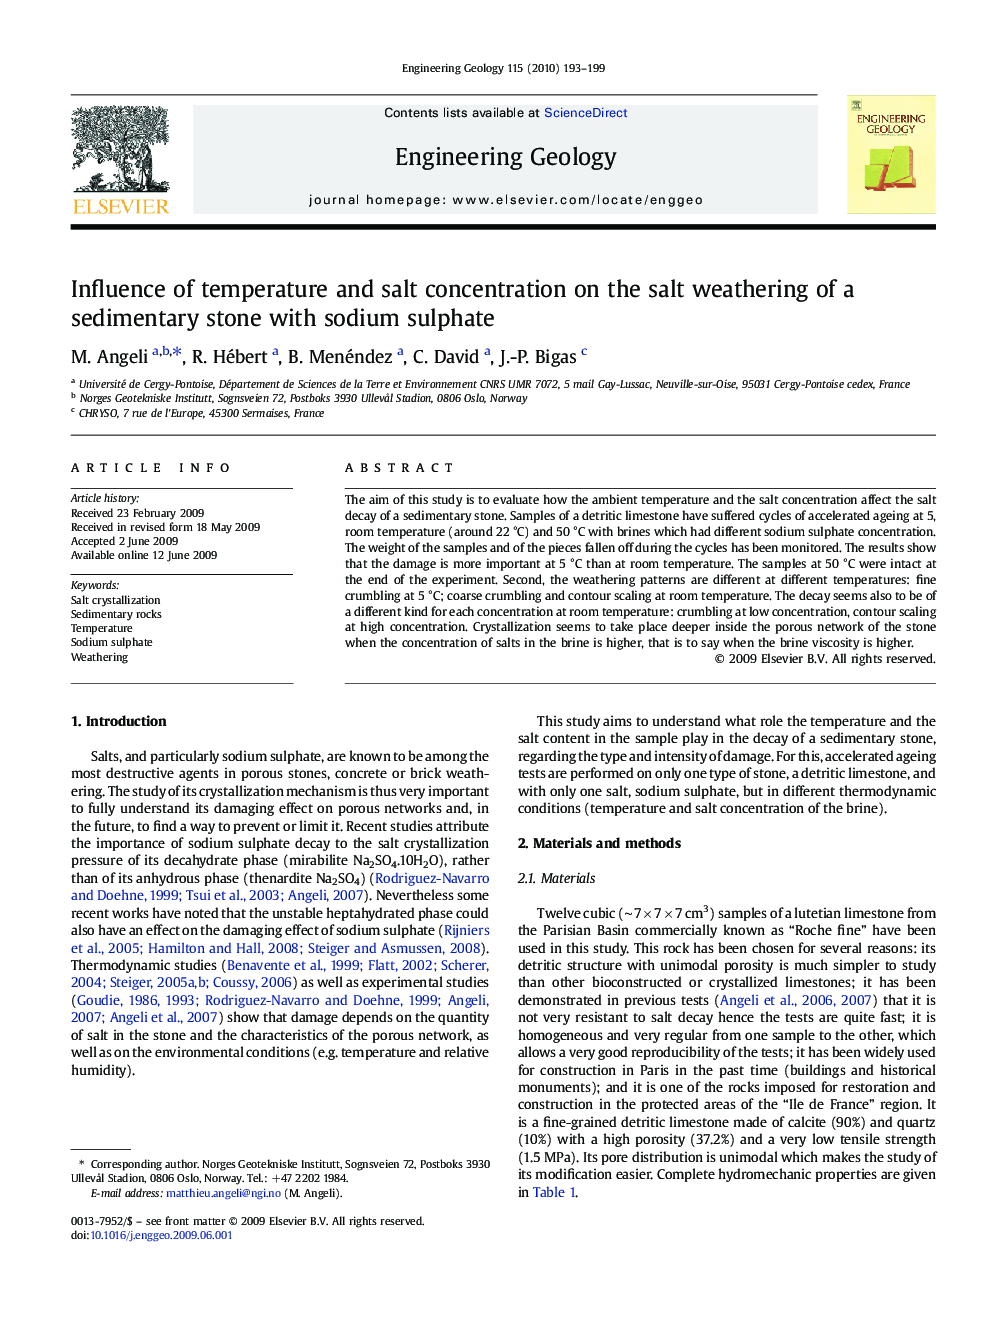 Influence of temperature and salt concentration on the salt weathering of a sedimentary stone with sodium sulphate